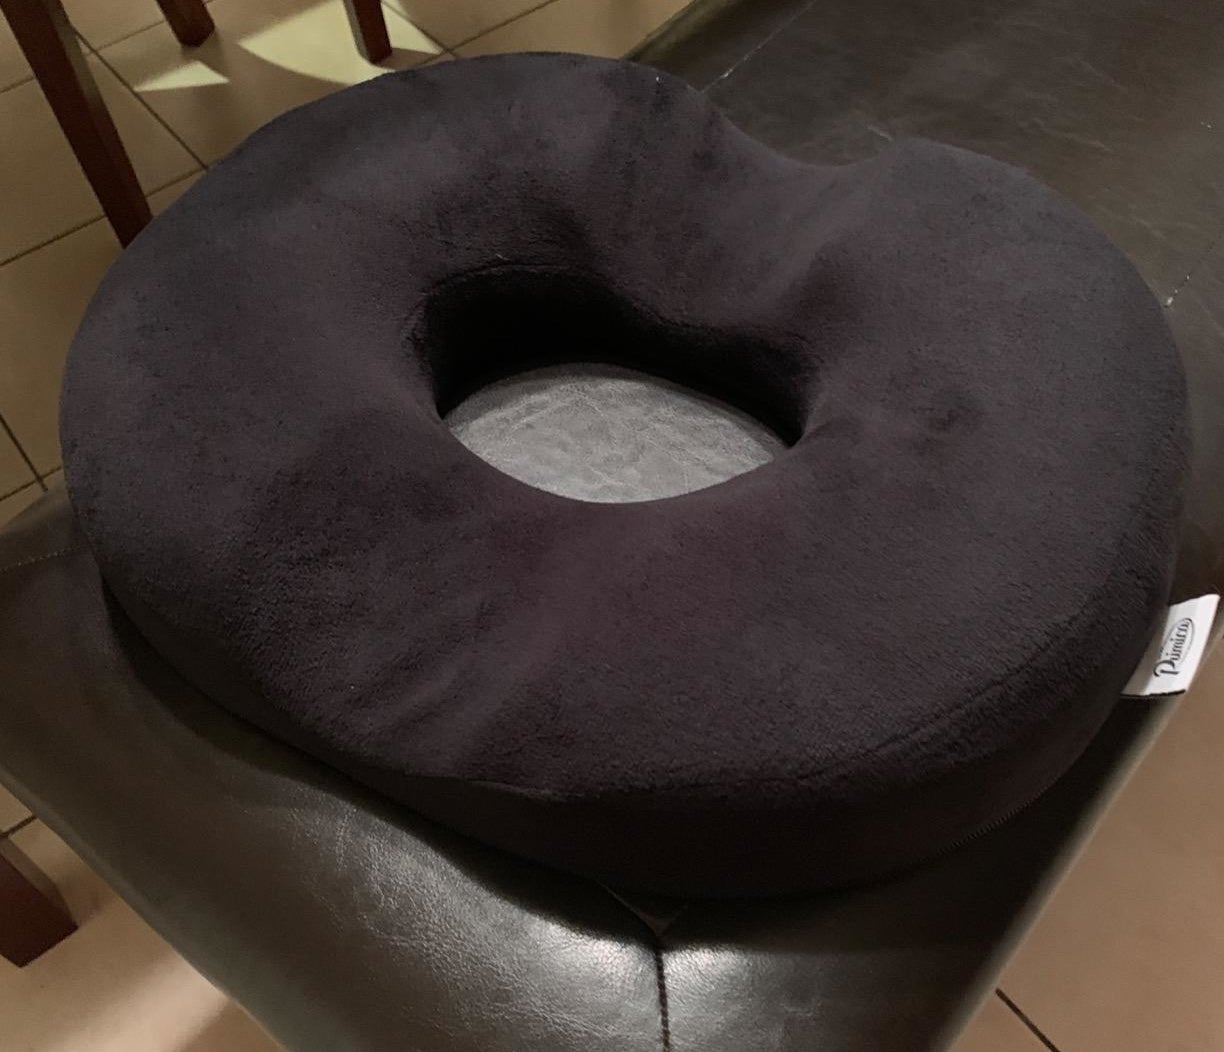 black donut-shaped pillow on a chair